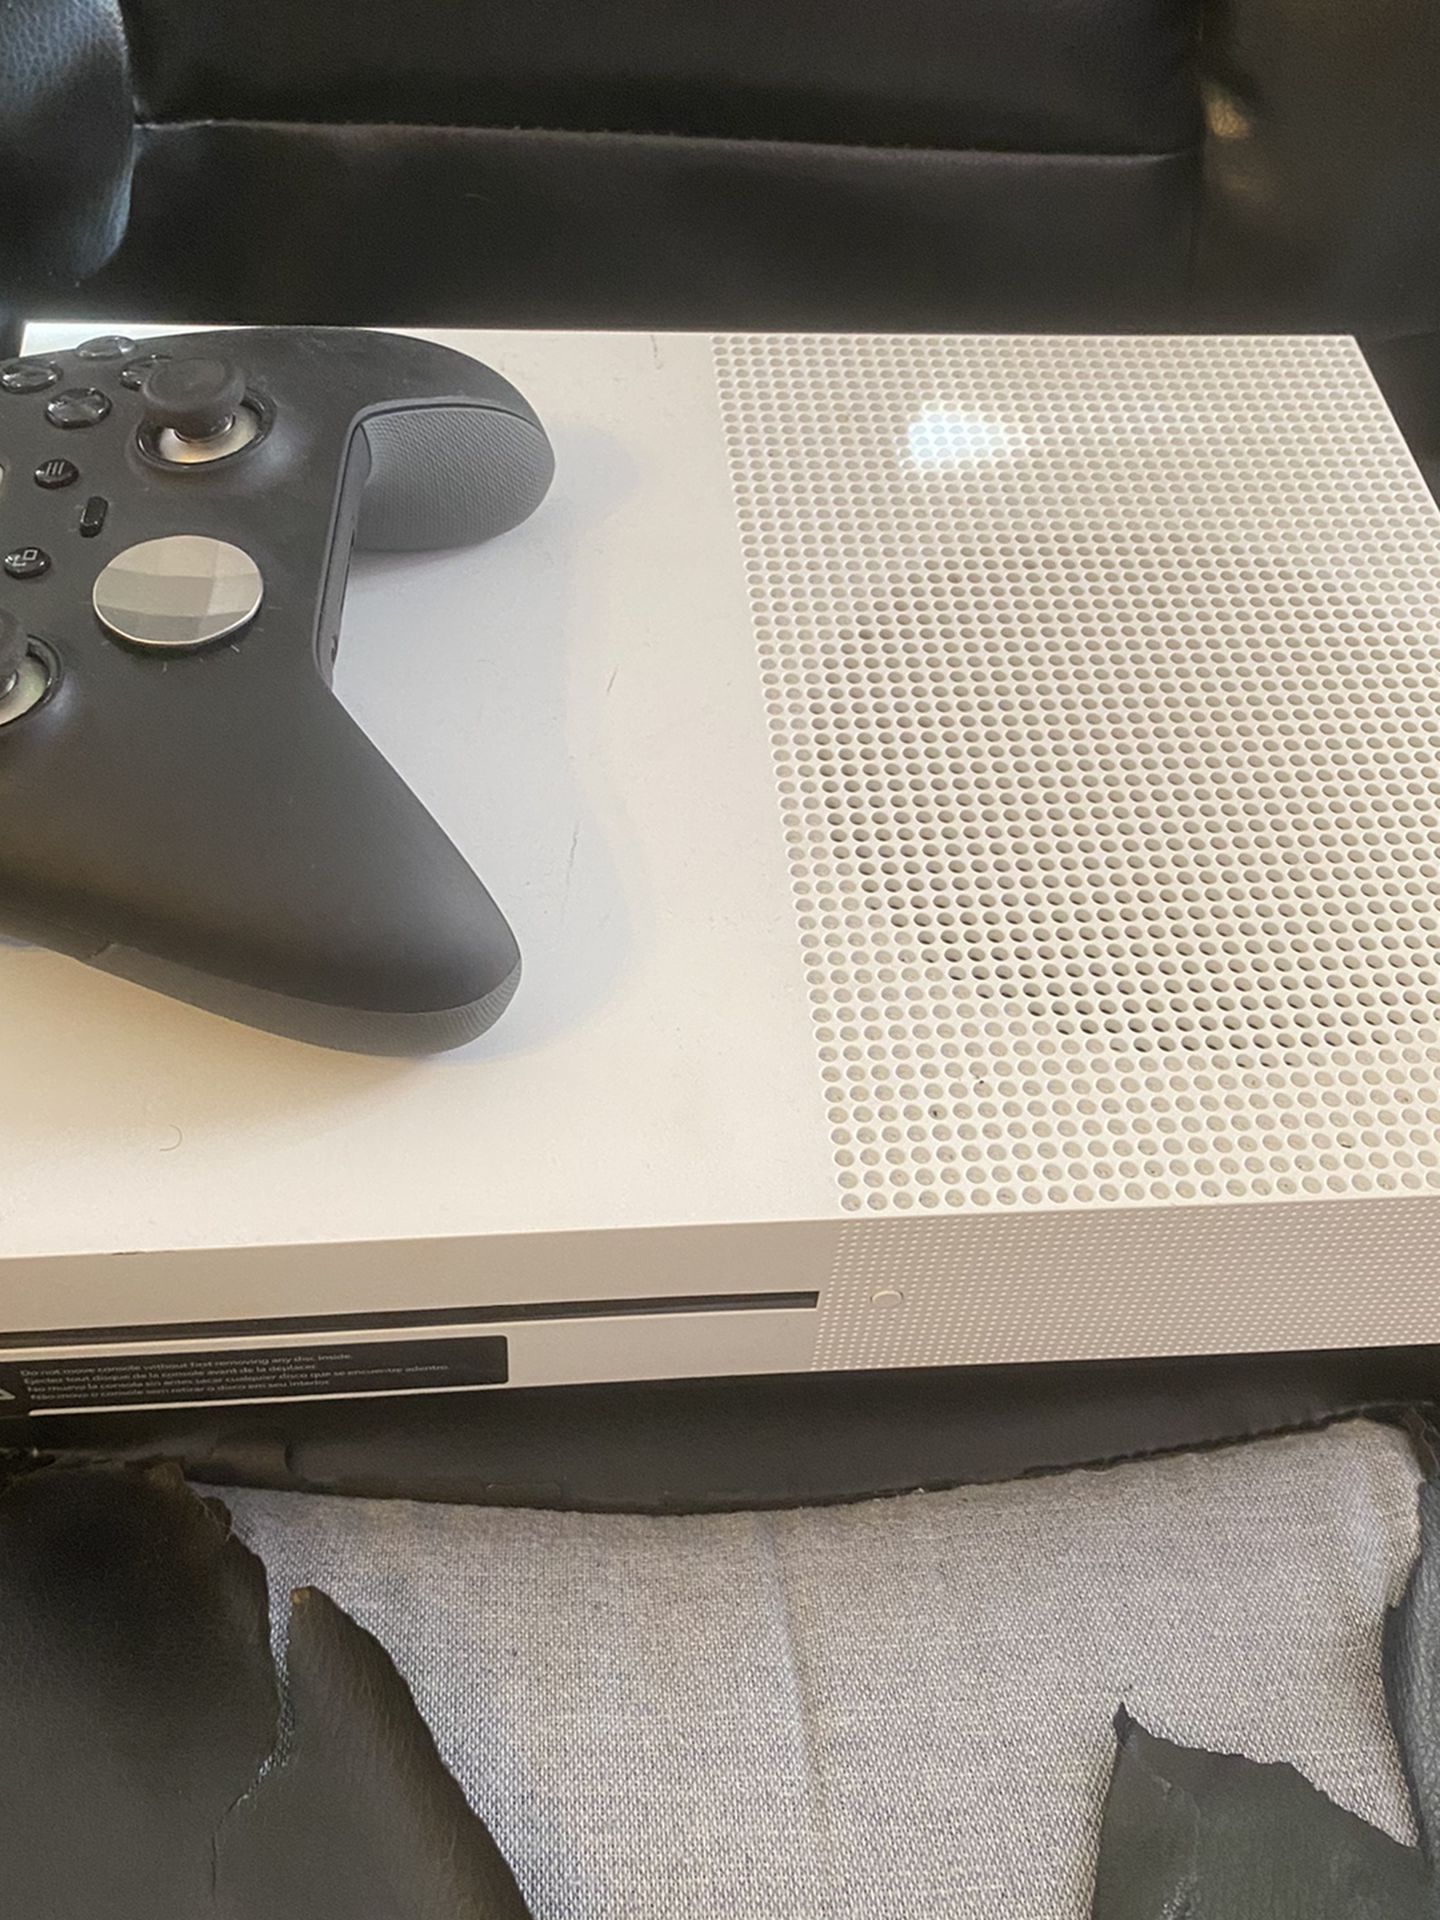 Xbox One W/controller